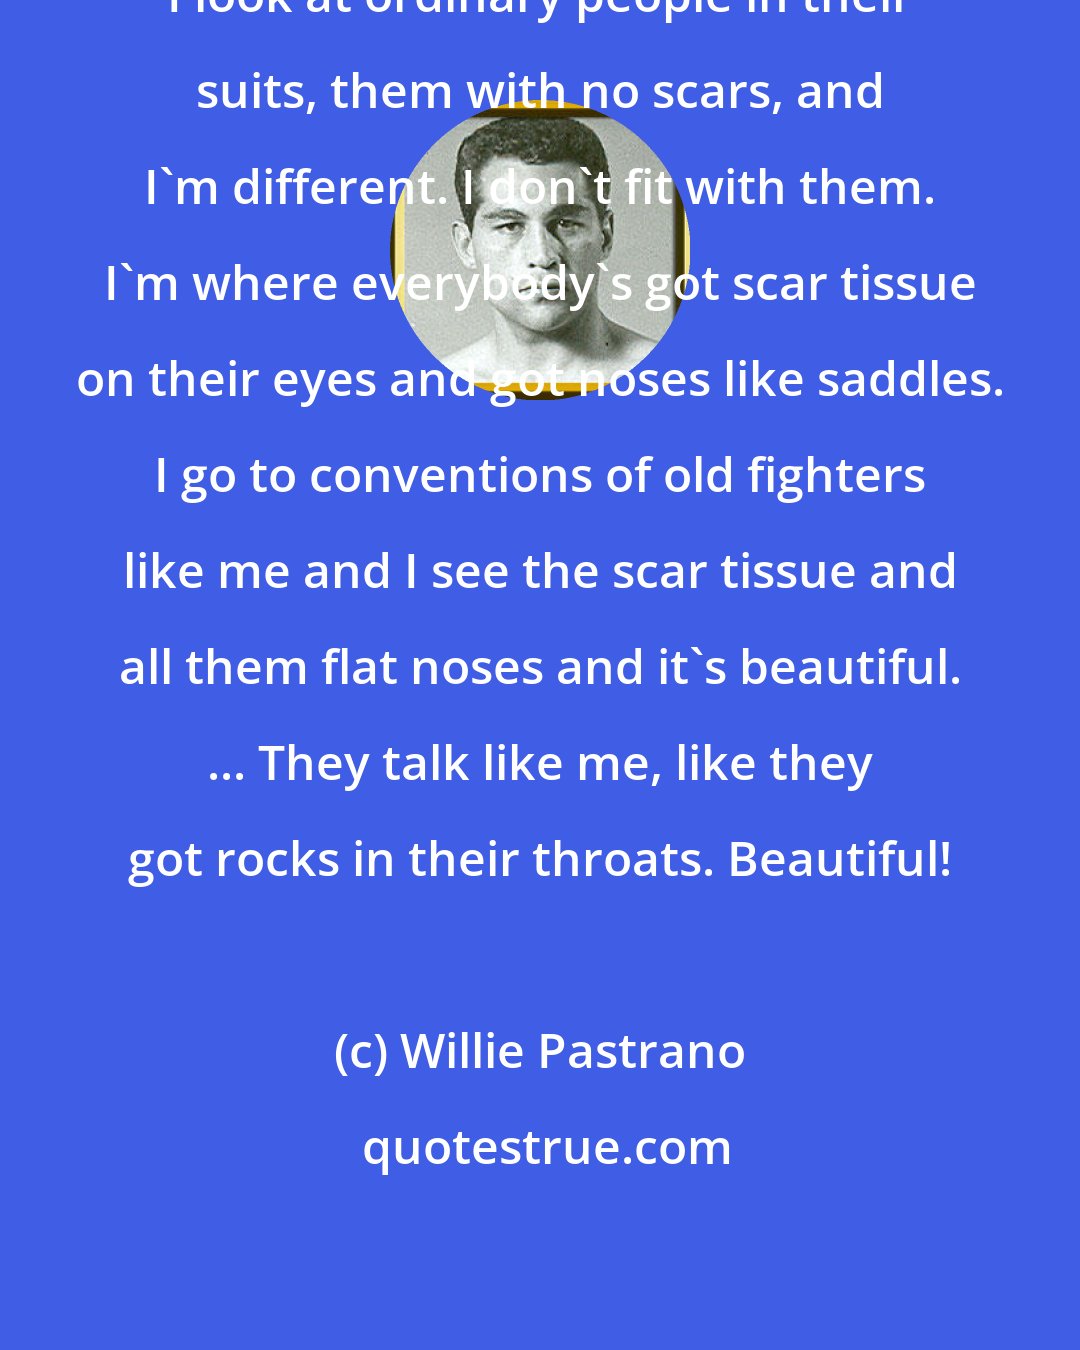 Willie Pastrano: I look at ordinary people in their suits, them with no scars, and I'm different. I don't fit with them. I'm where everybody's got scar tissue on their eyes and got noses like saddles. I go to conventions of old fighters like me and I see the scar tissue and all them flat noses and it's beautiful. ... They talk like me, like they got rocks in their throats. Beautiful!